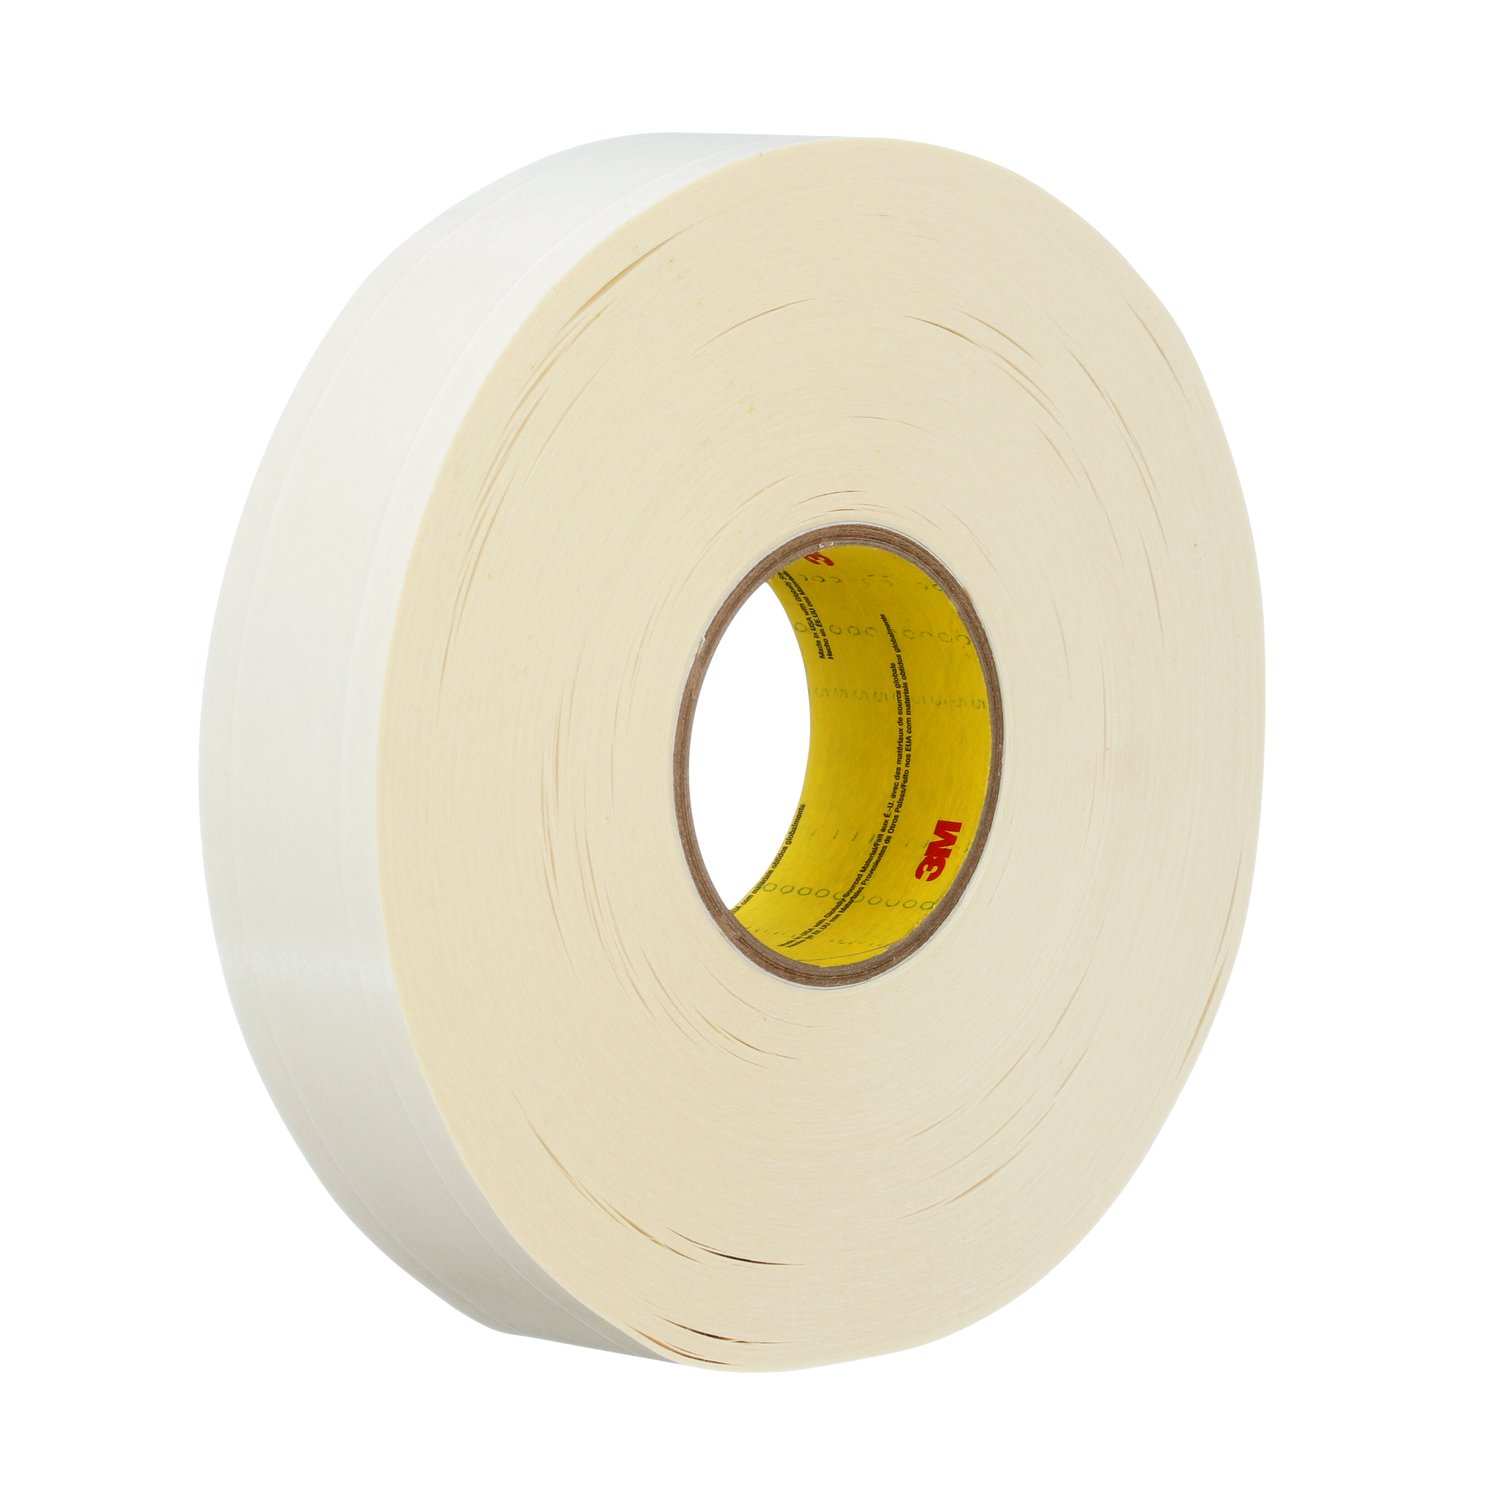 7100028158 - 3M Repulpable Heavy Duty Double Coated Tape R3287, White, 60 mm x 55 m, 5 mil, 12 Rolls/Case